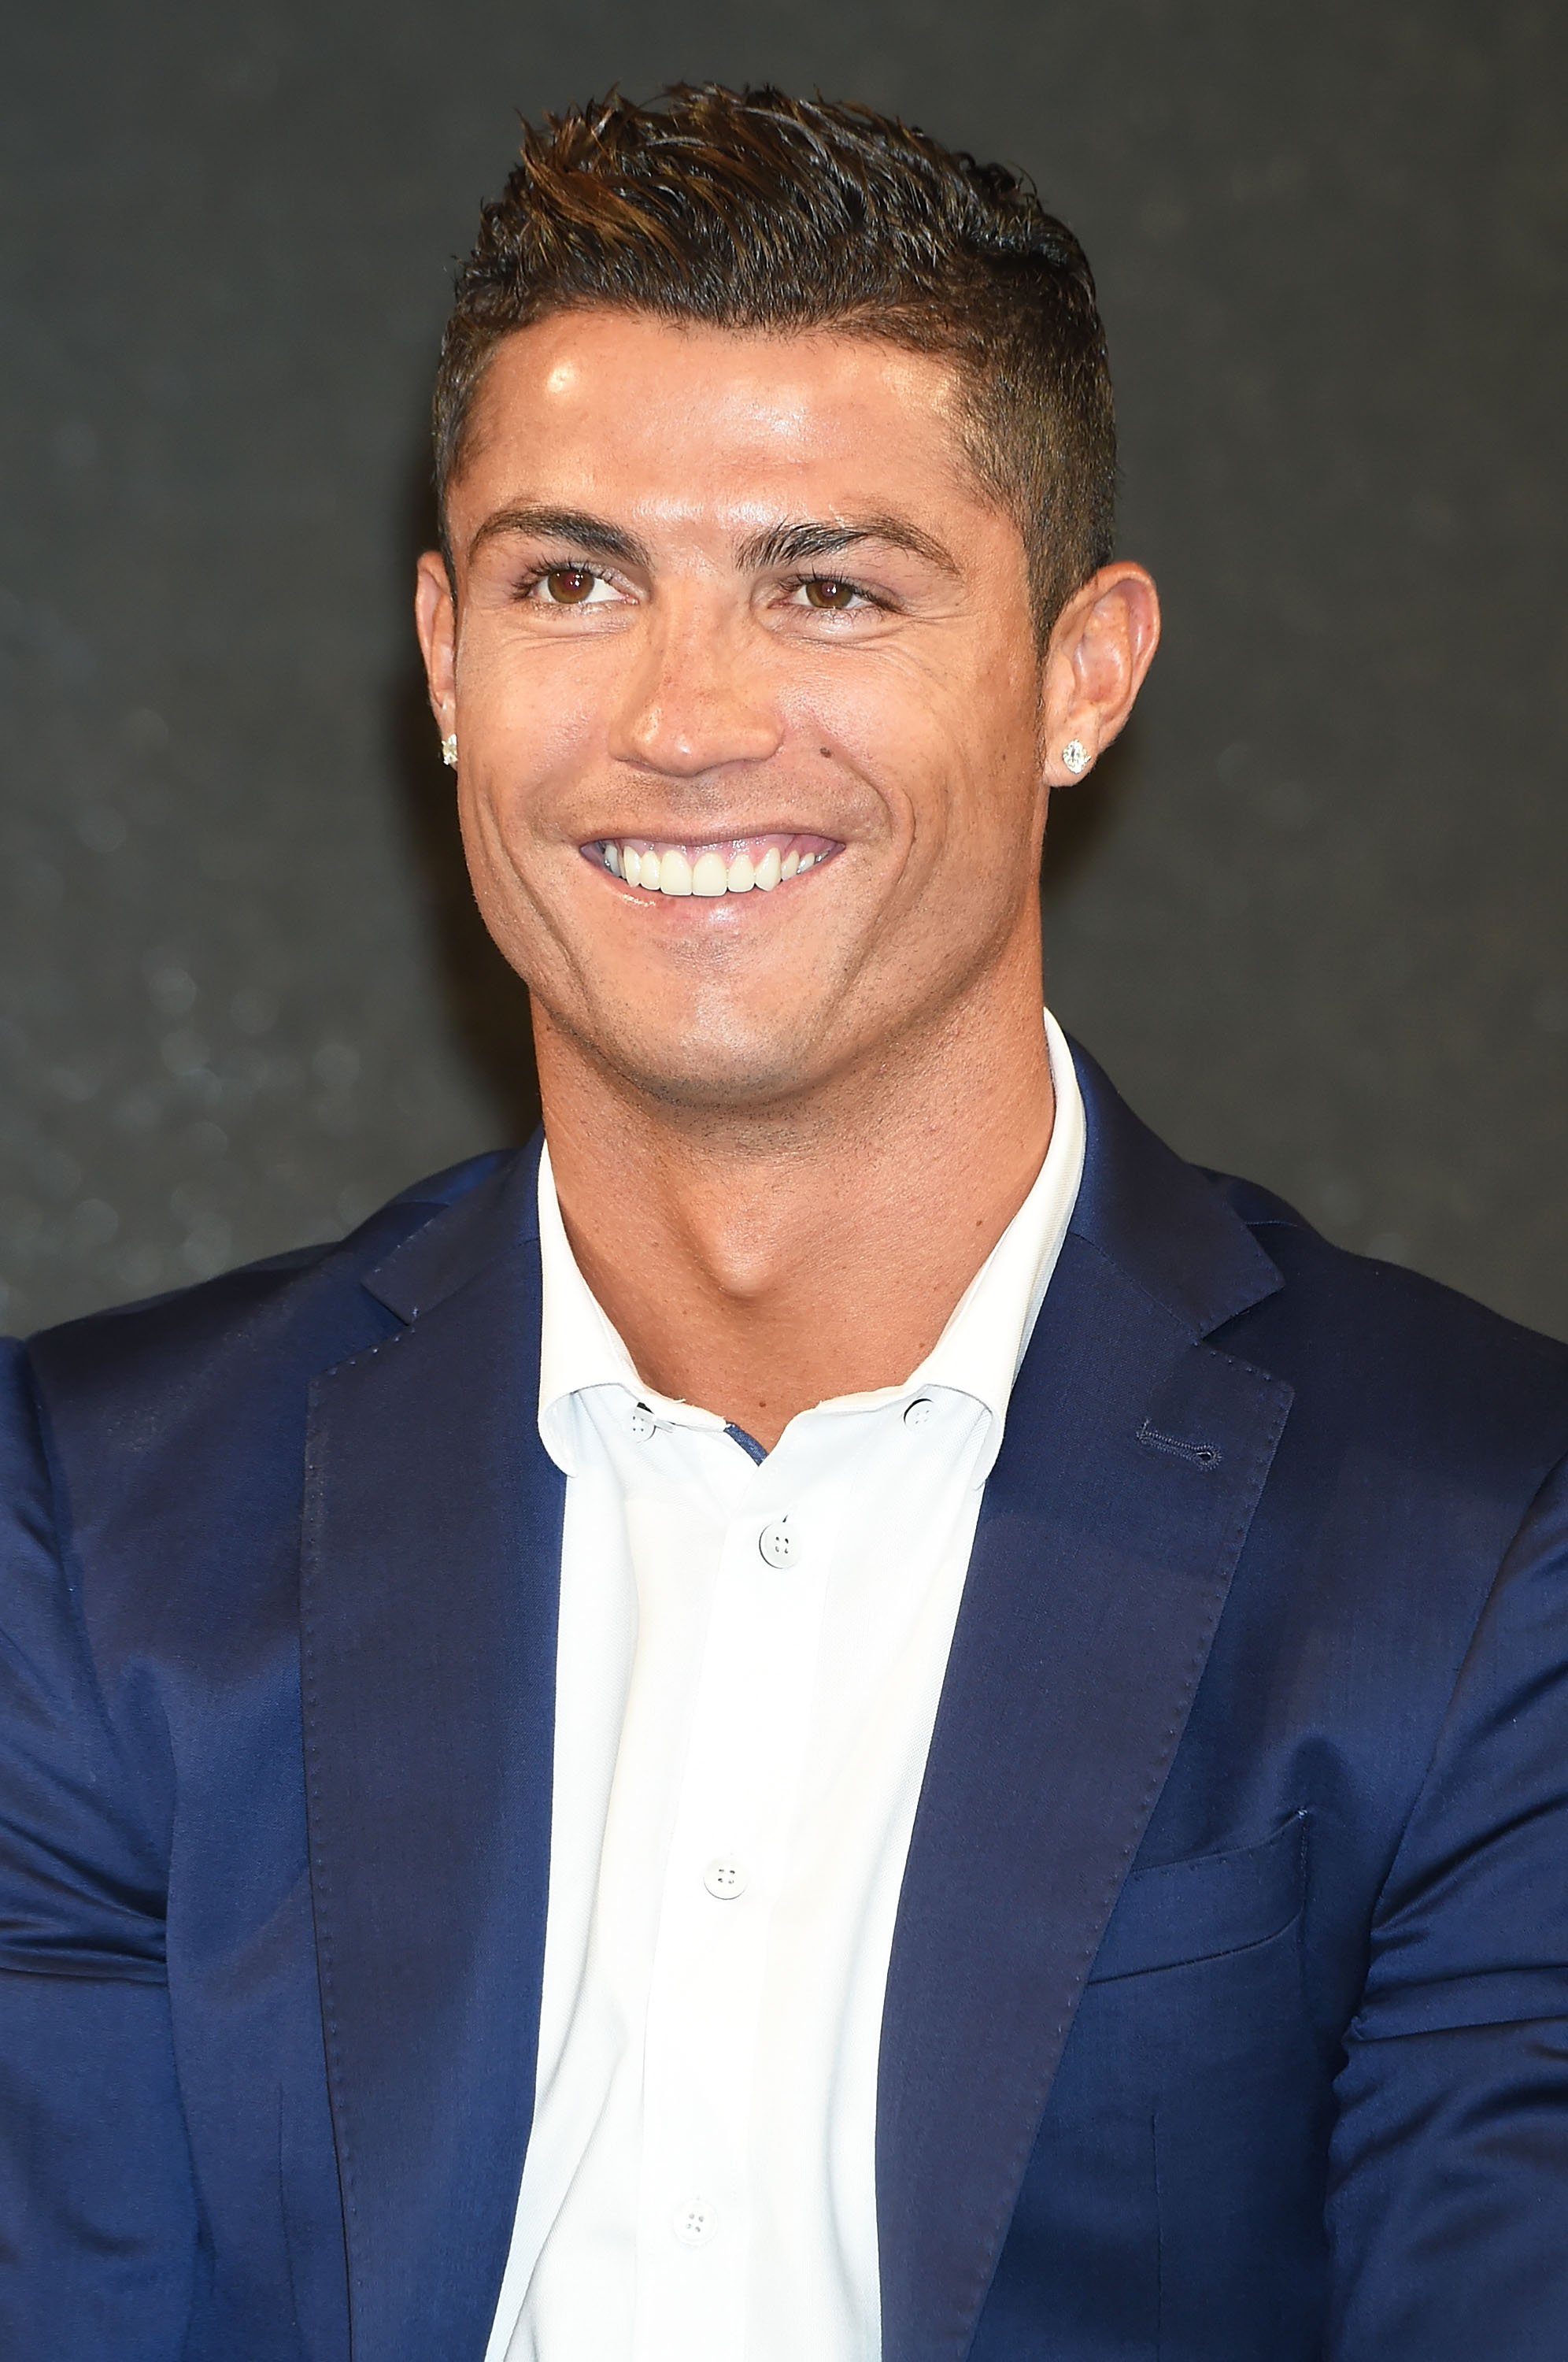 Cristiano Ronaldo during a press conference on July 7, 2015 in Tokyo, Japan.